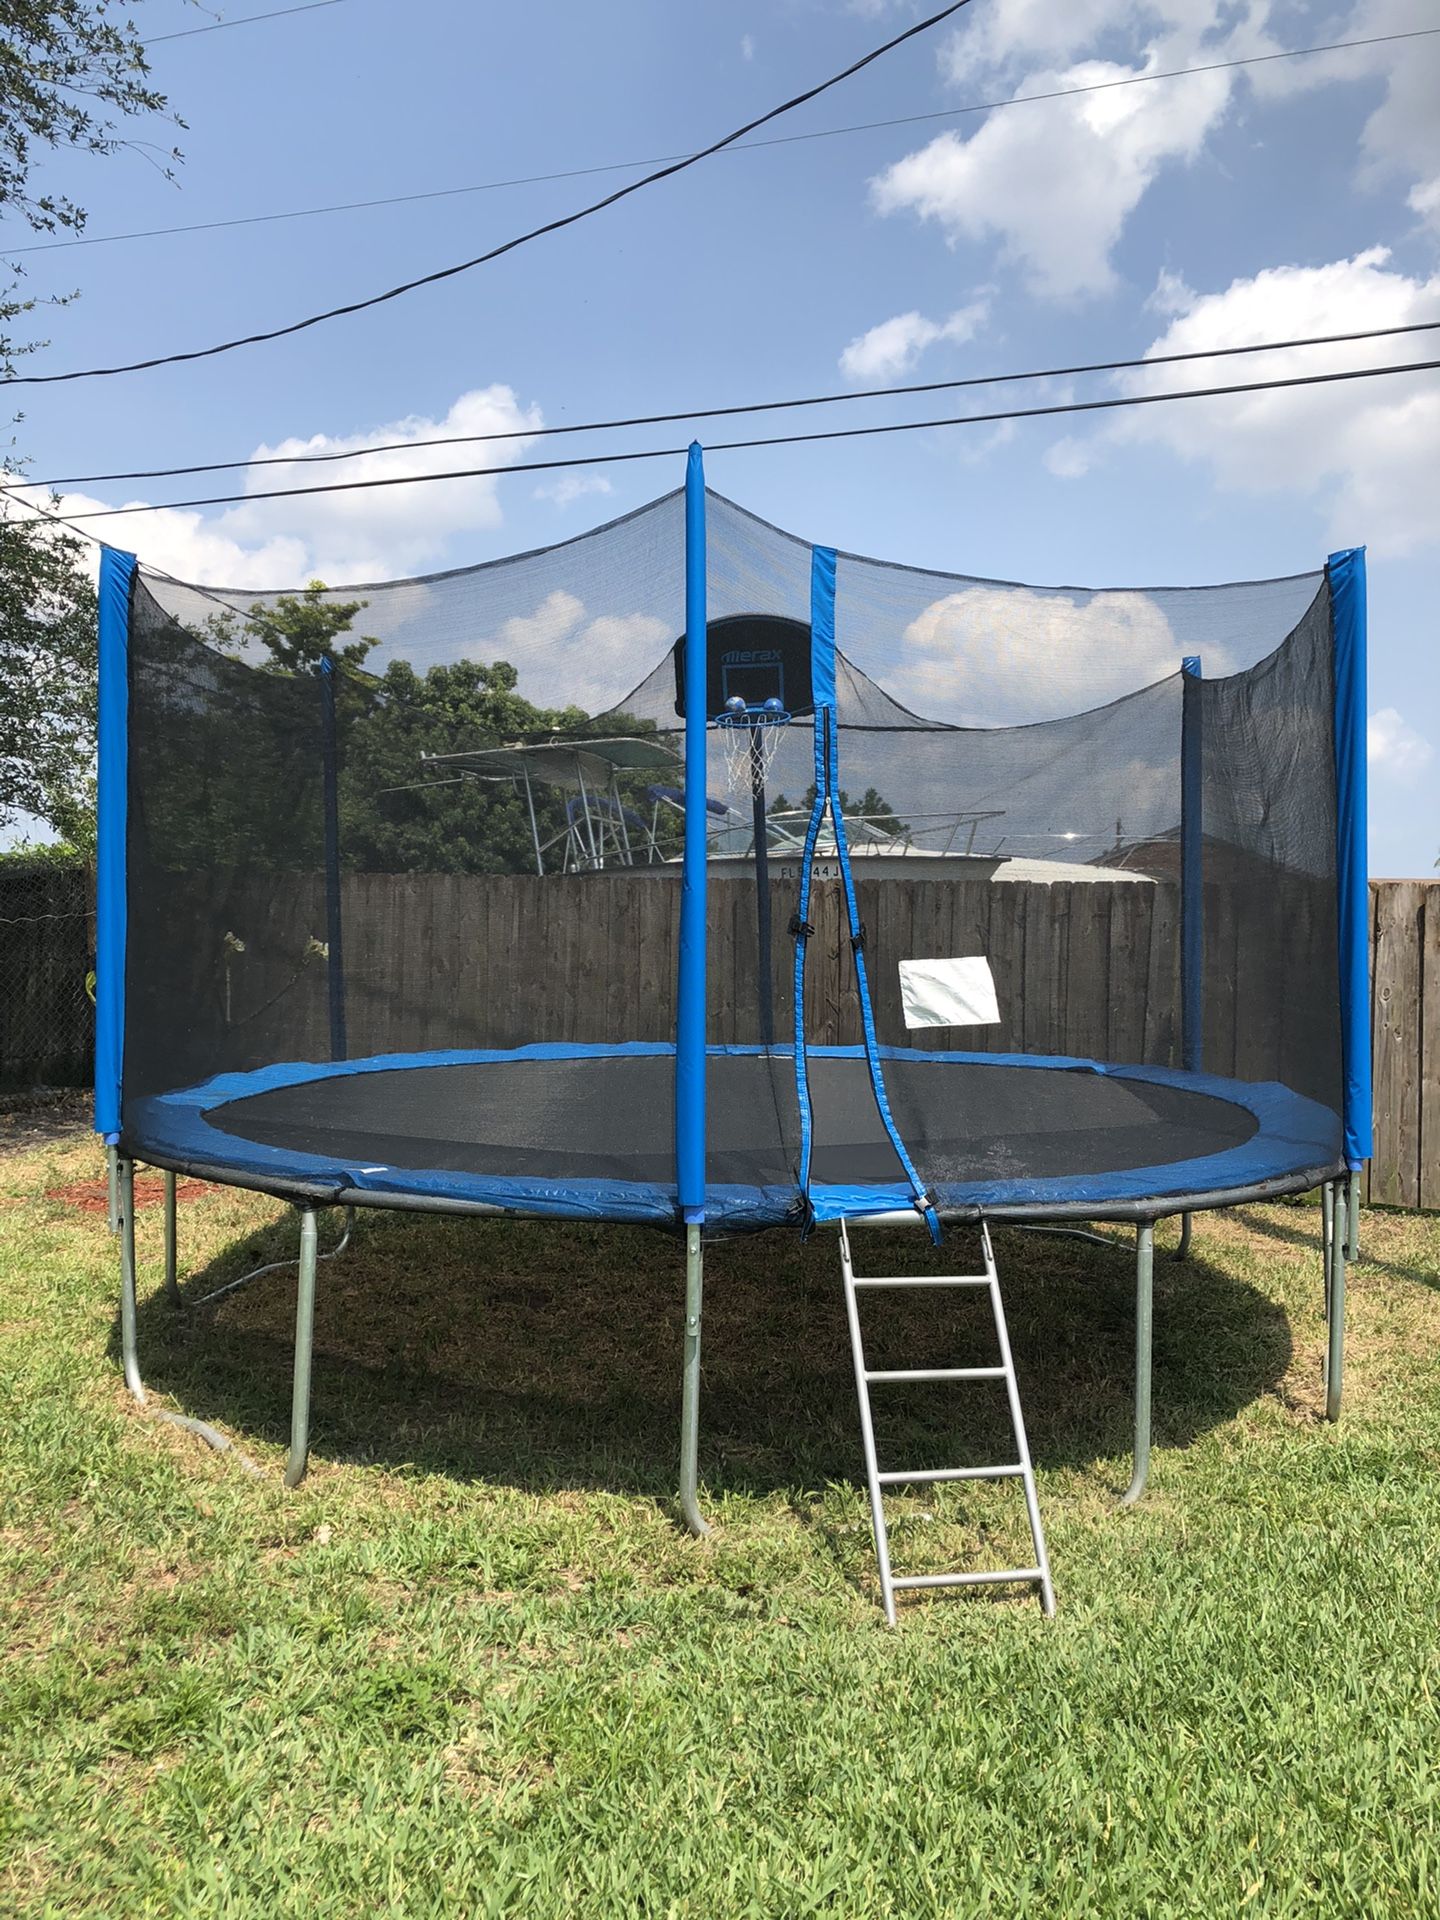 Trampoline with safety net and basketball hoop